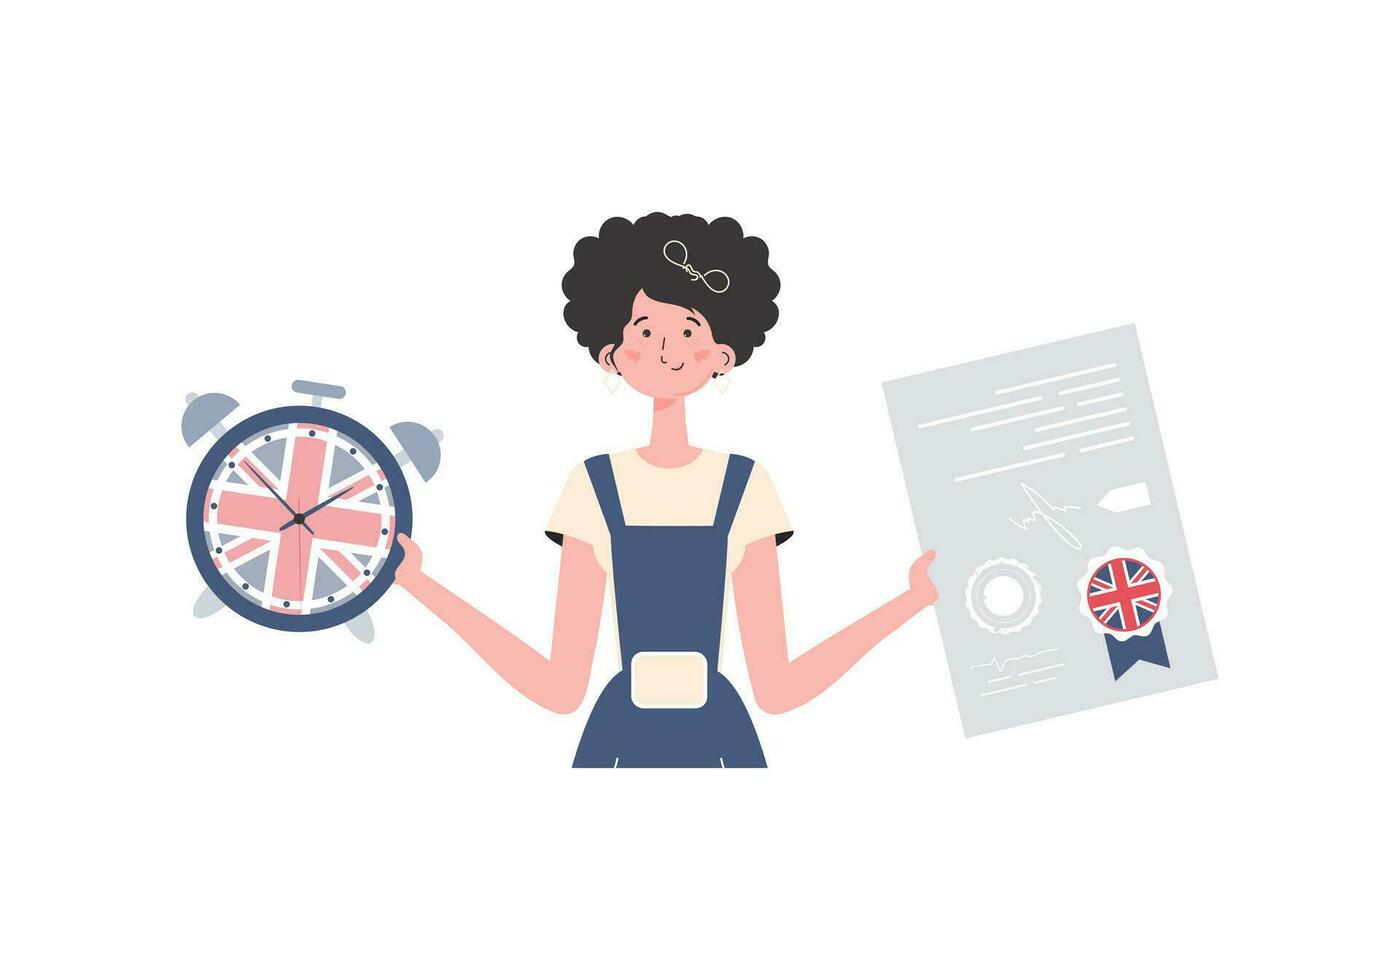 Woman teacher shows that it's time to learn English. The concept of teaching English. Isolated. trendy style. Vector illustration.